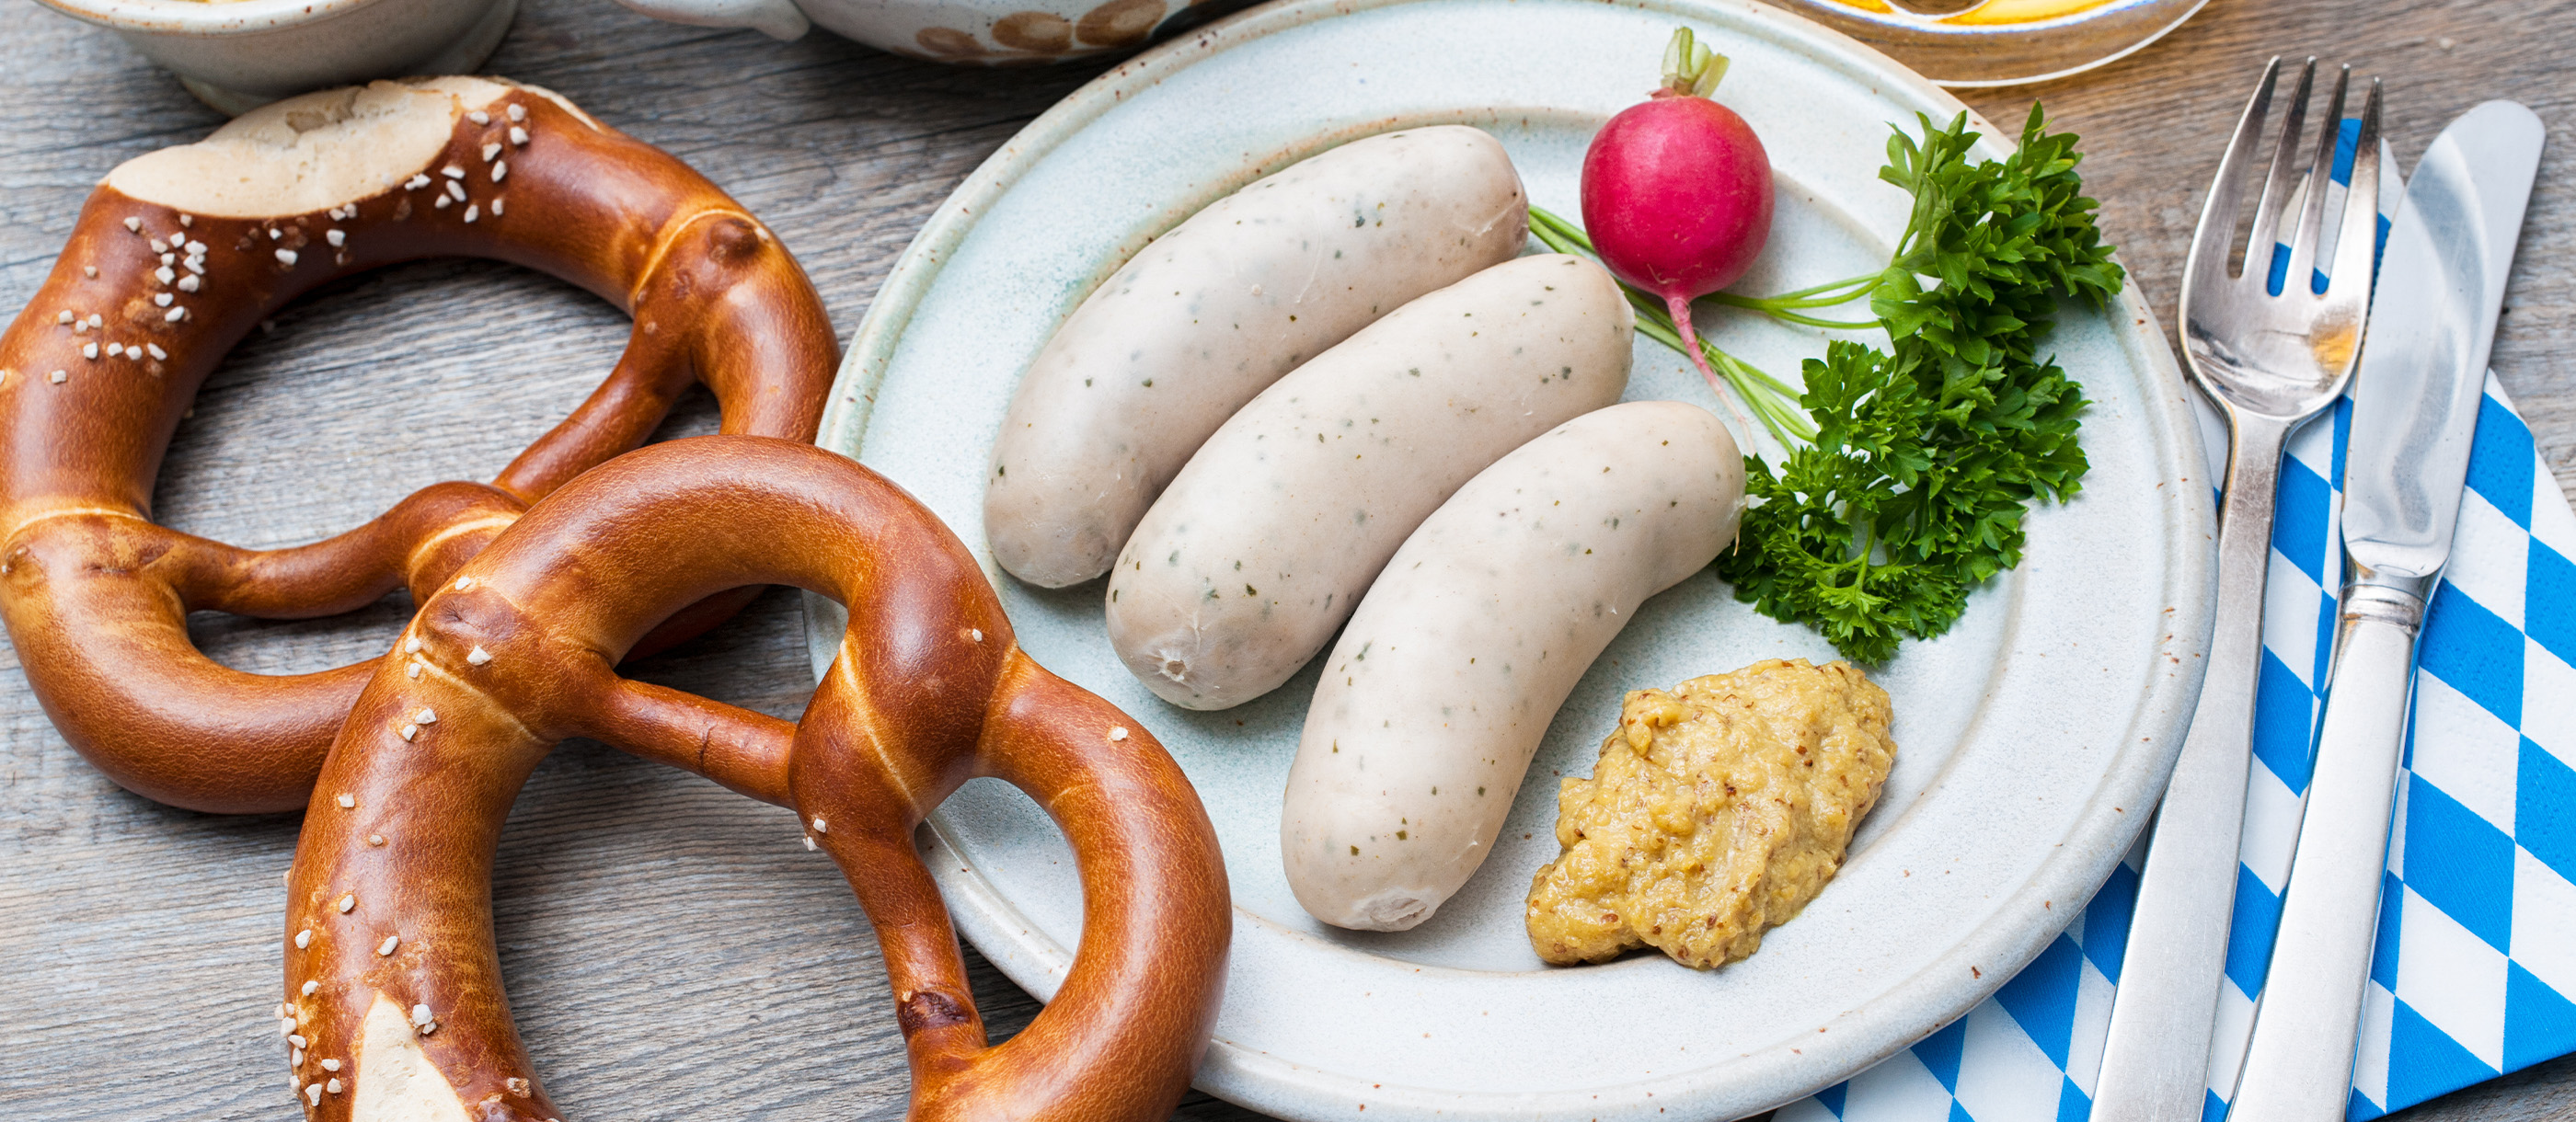 What are 3 popular foods in Germany?